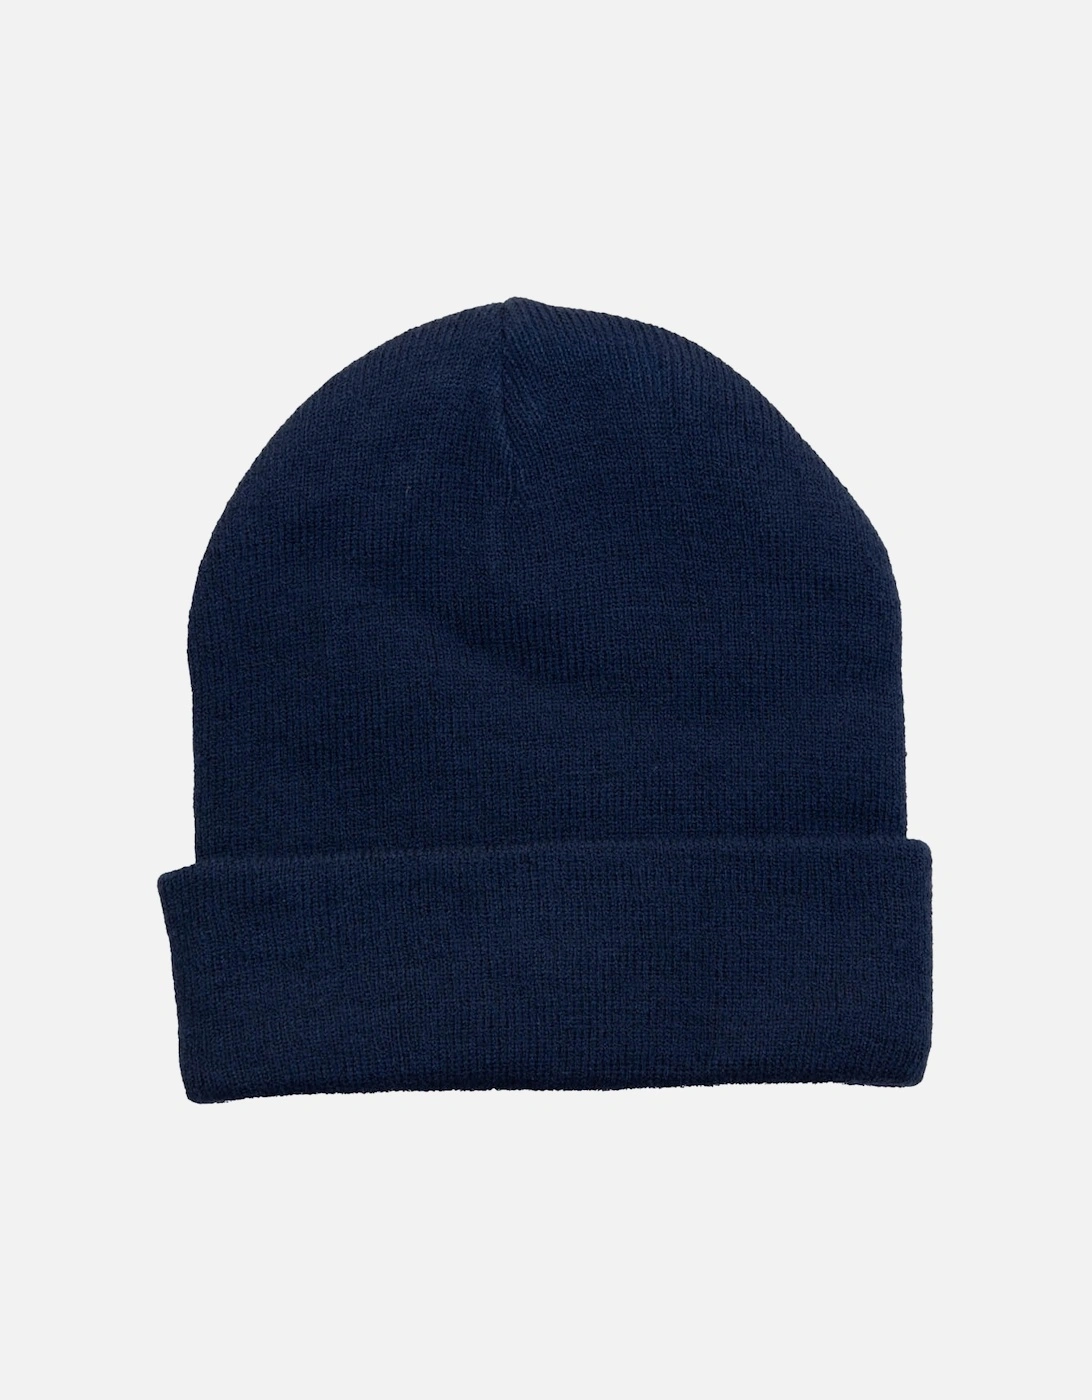 Mens Inflection Beanie (Navy)